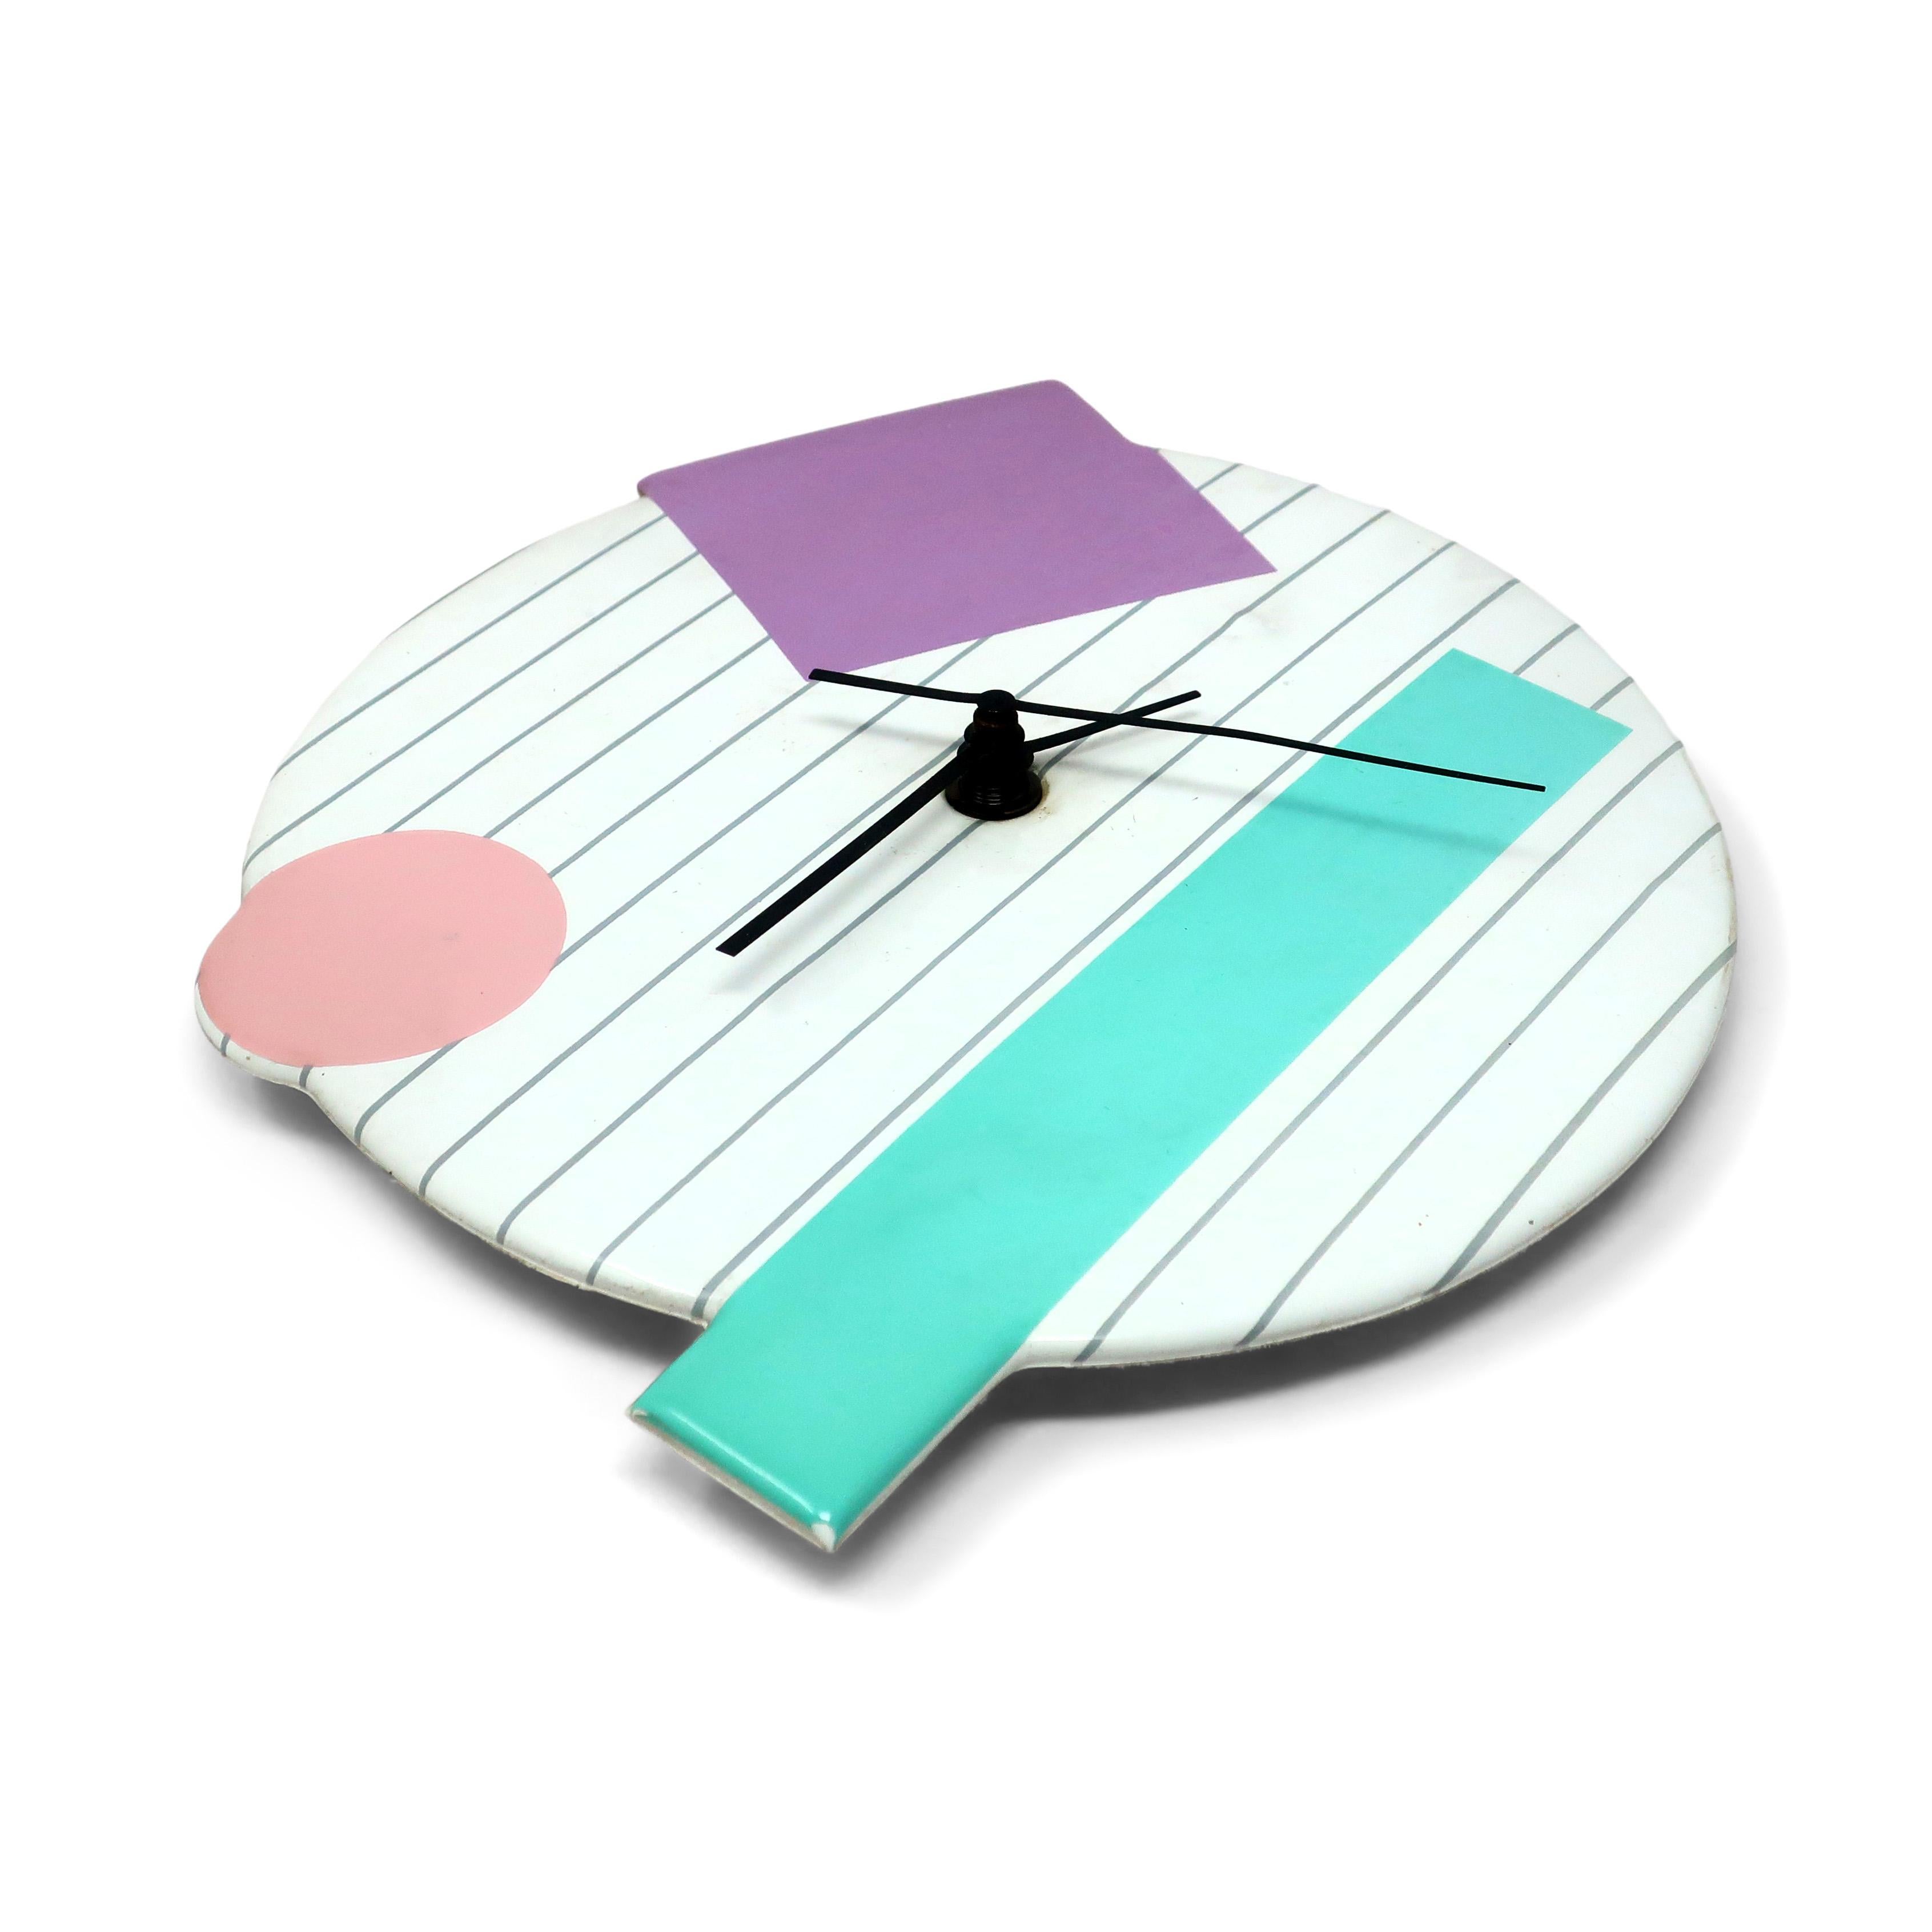 A fantastic postmodern, Memphis-inspired geometric wall clock with black hands, gray strips, and pastel primary colored accents by Small World Greetings from the 1990s.

In good vintage condition with wear consistent with age and use, including